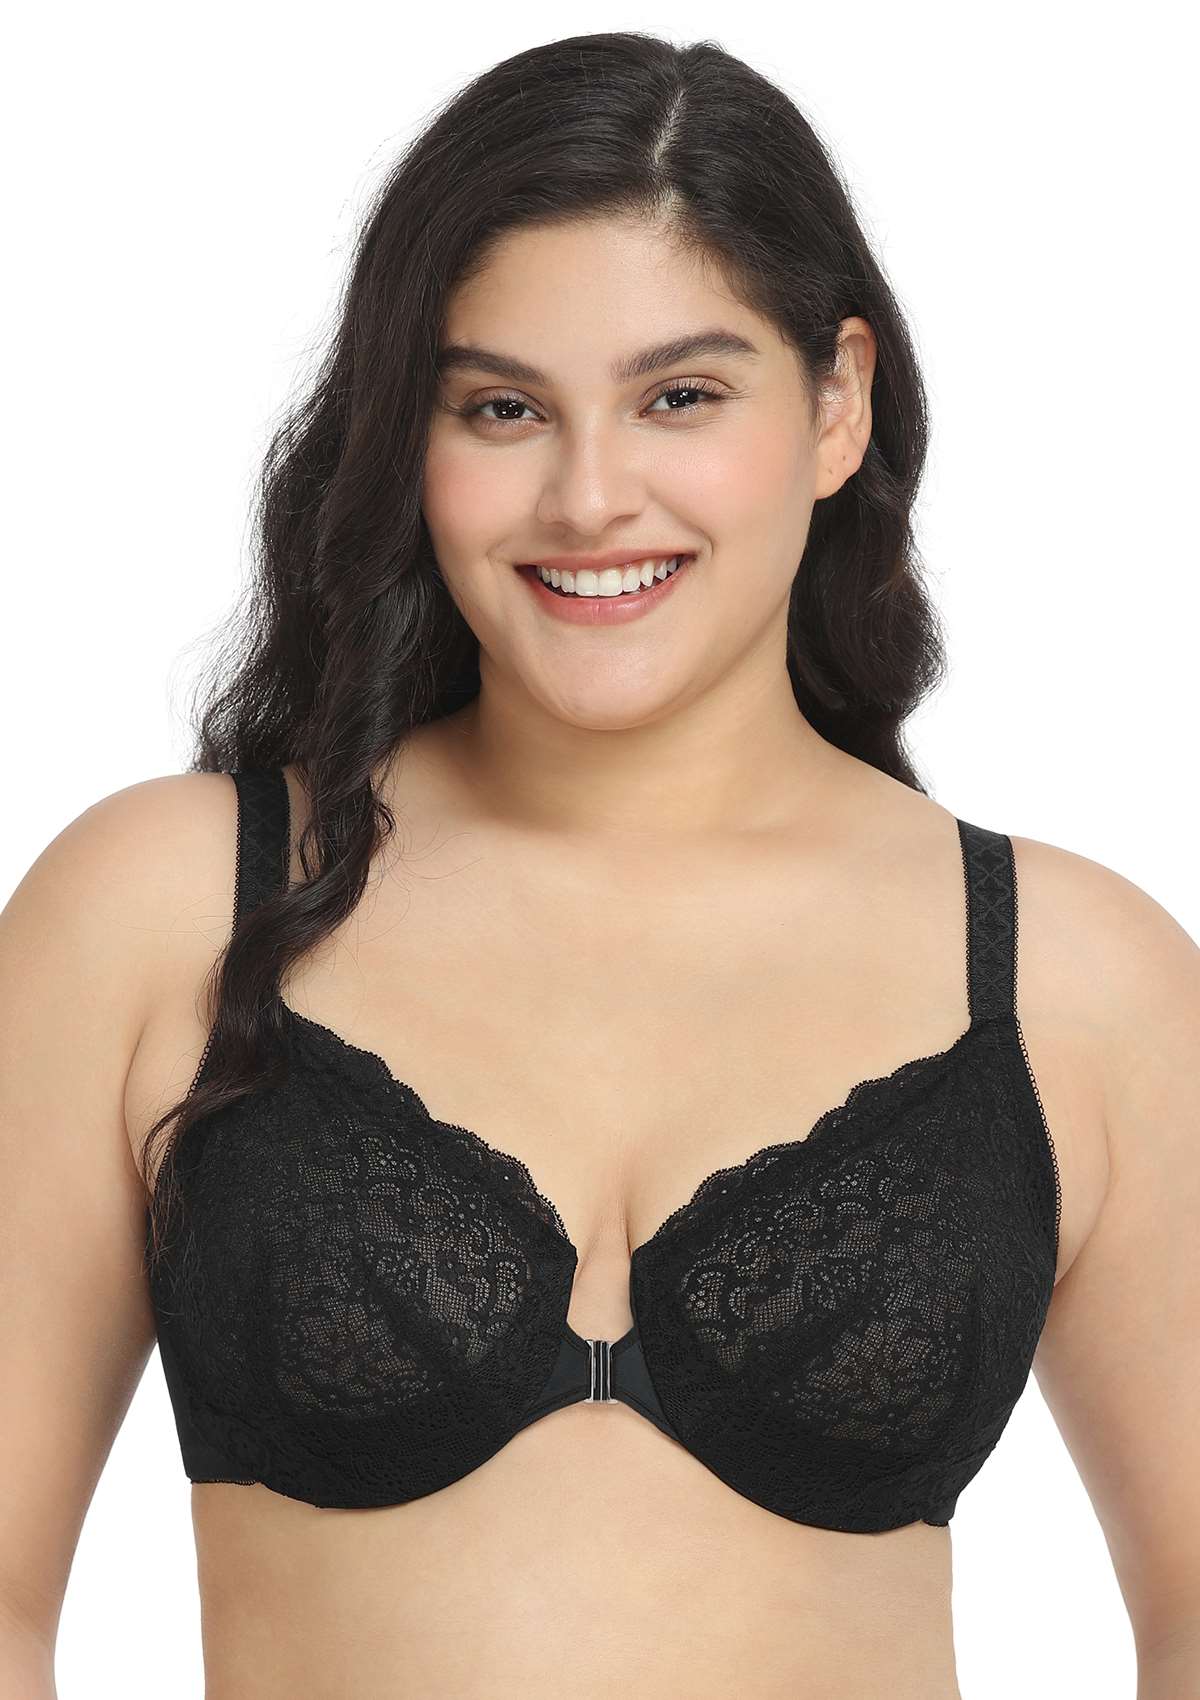 HSIA Nymphaea Front-Close Unlined Retro Floral Lace Back Smoothing Bra - Black / 38 / I